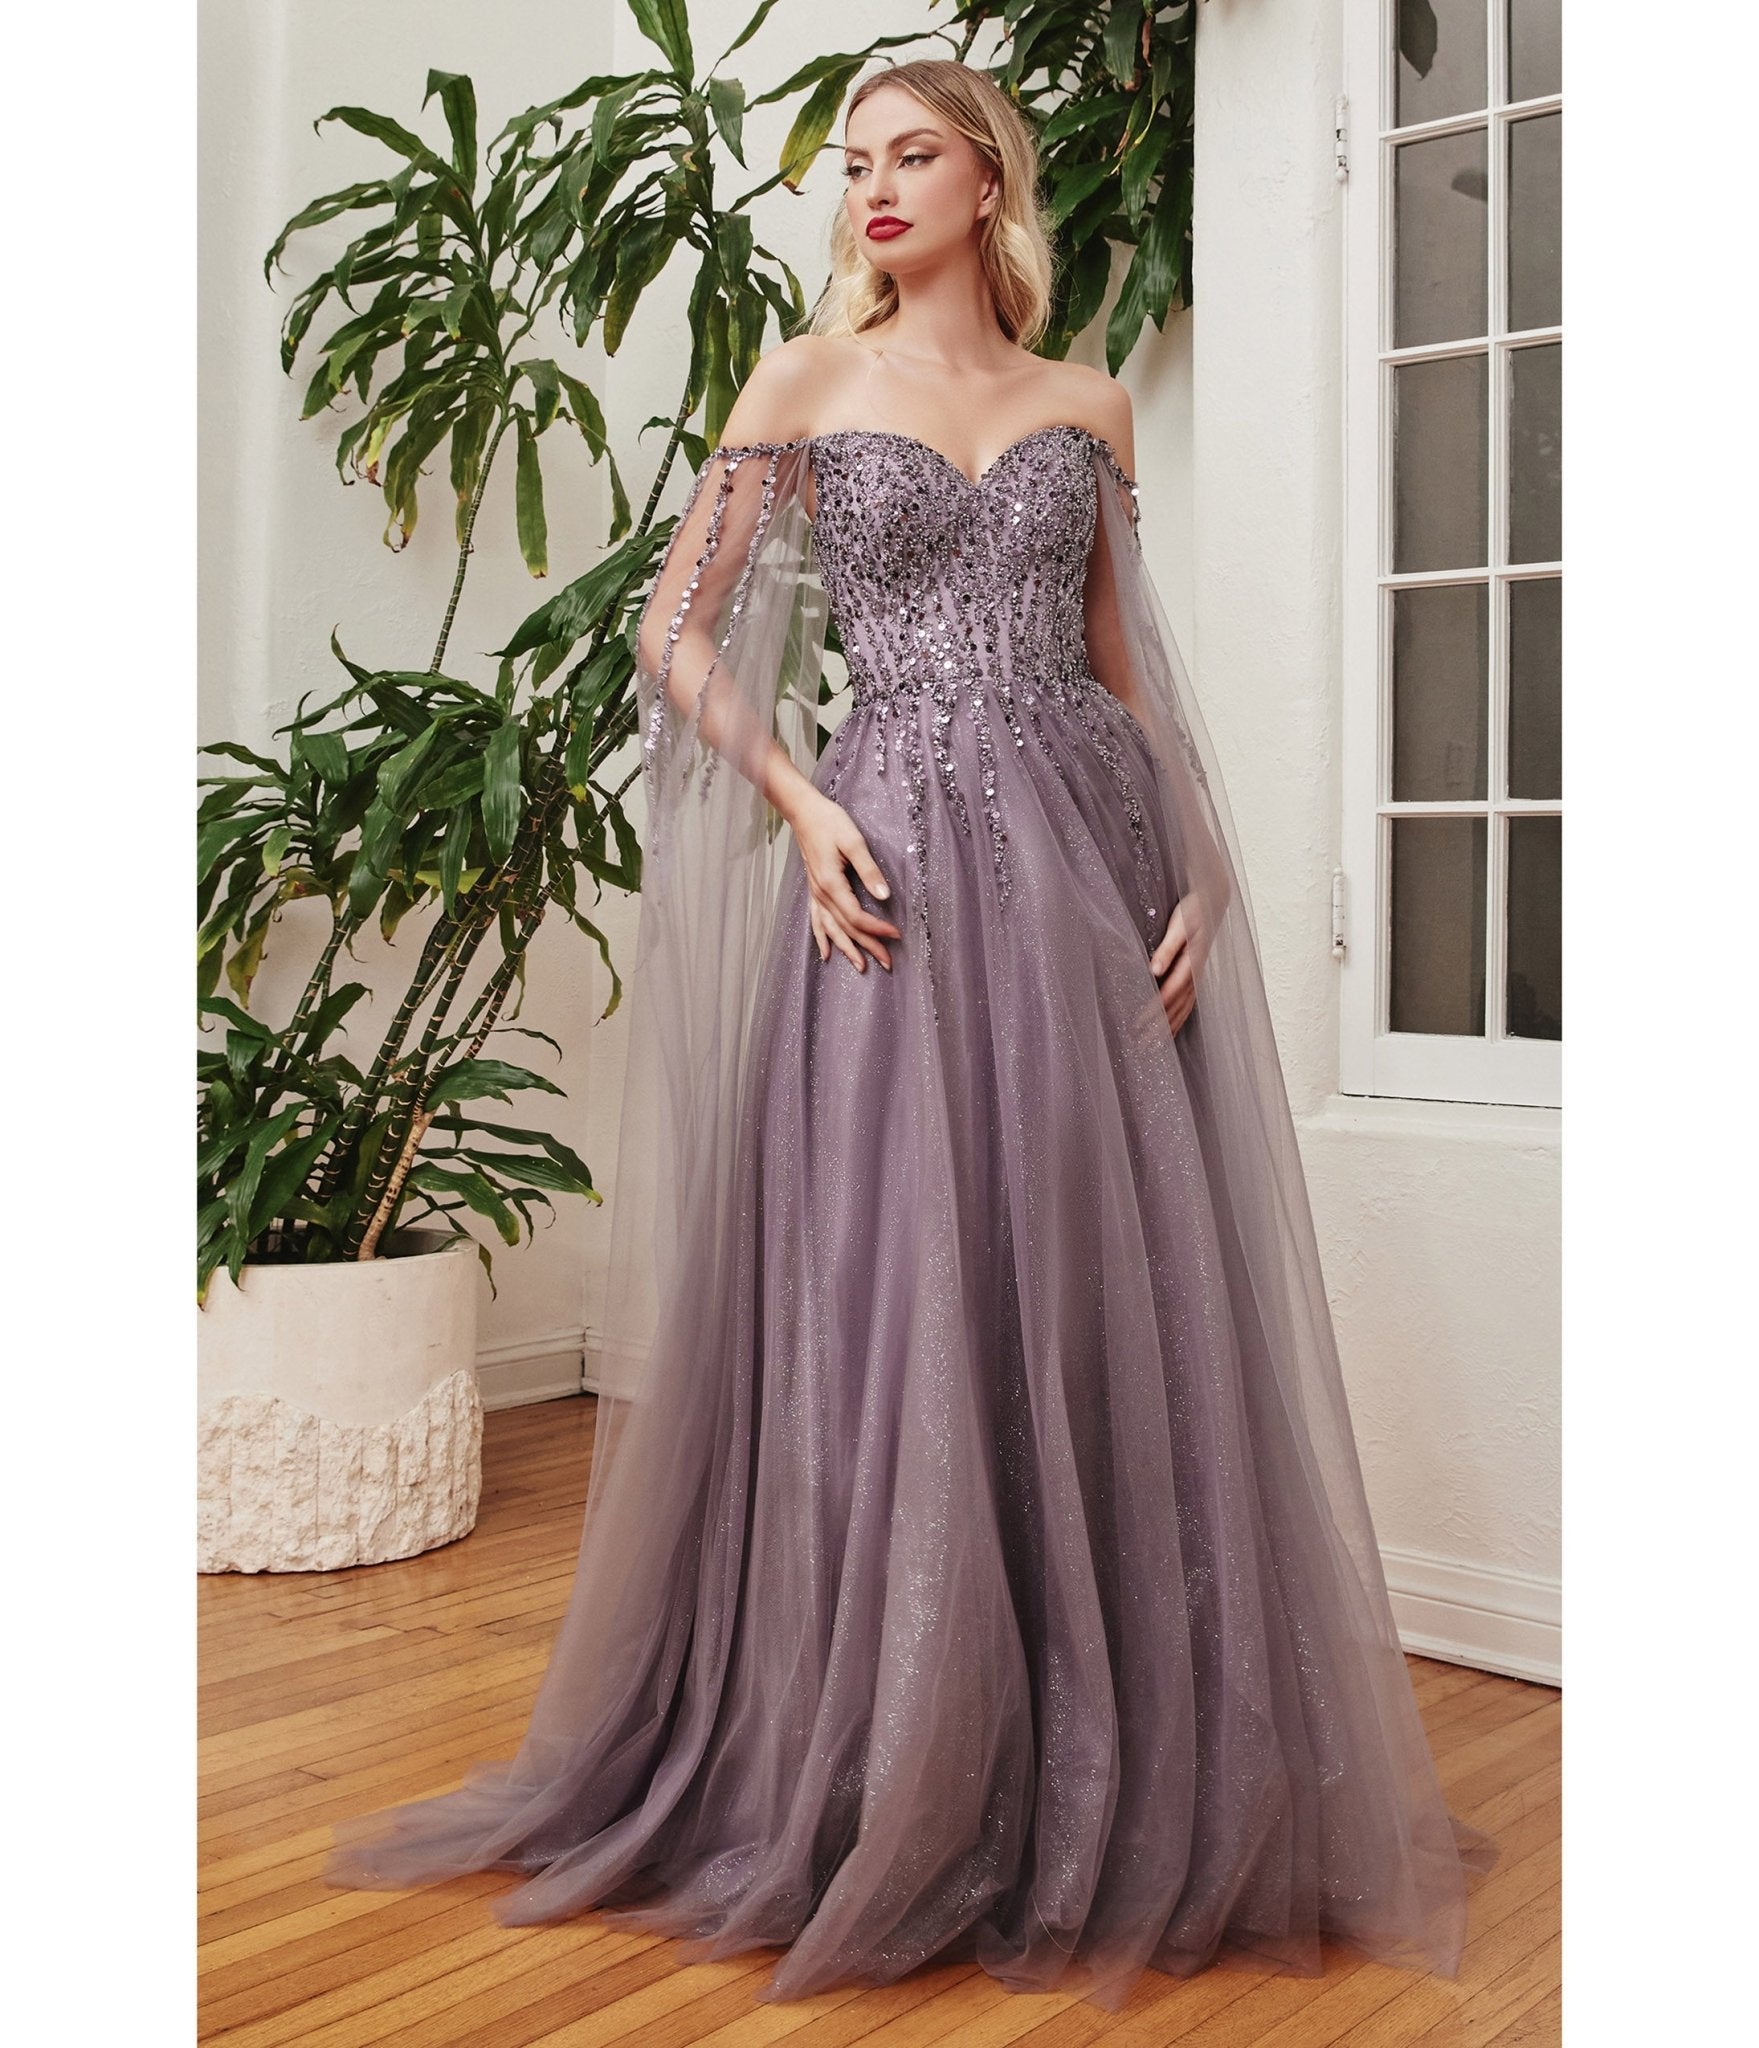 Grey Embellished Gown in Net with Cutdana and Beads Work On The Bodice